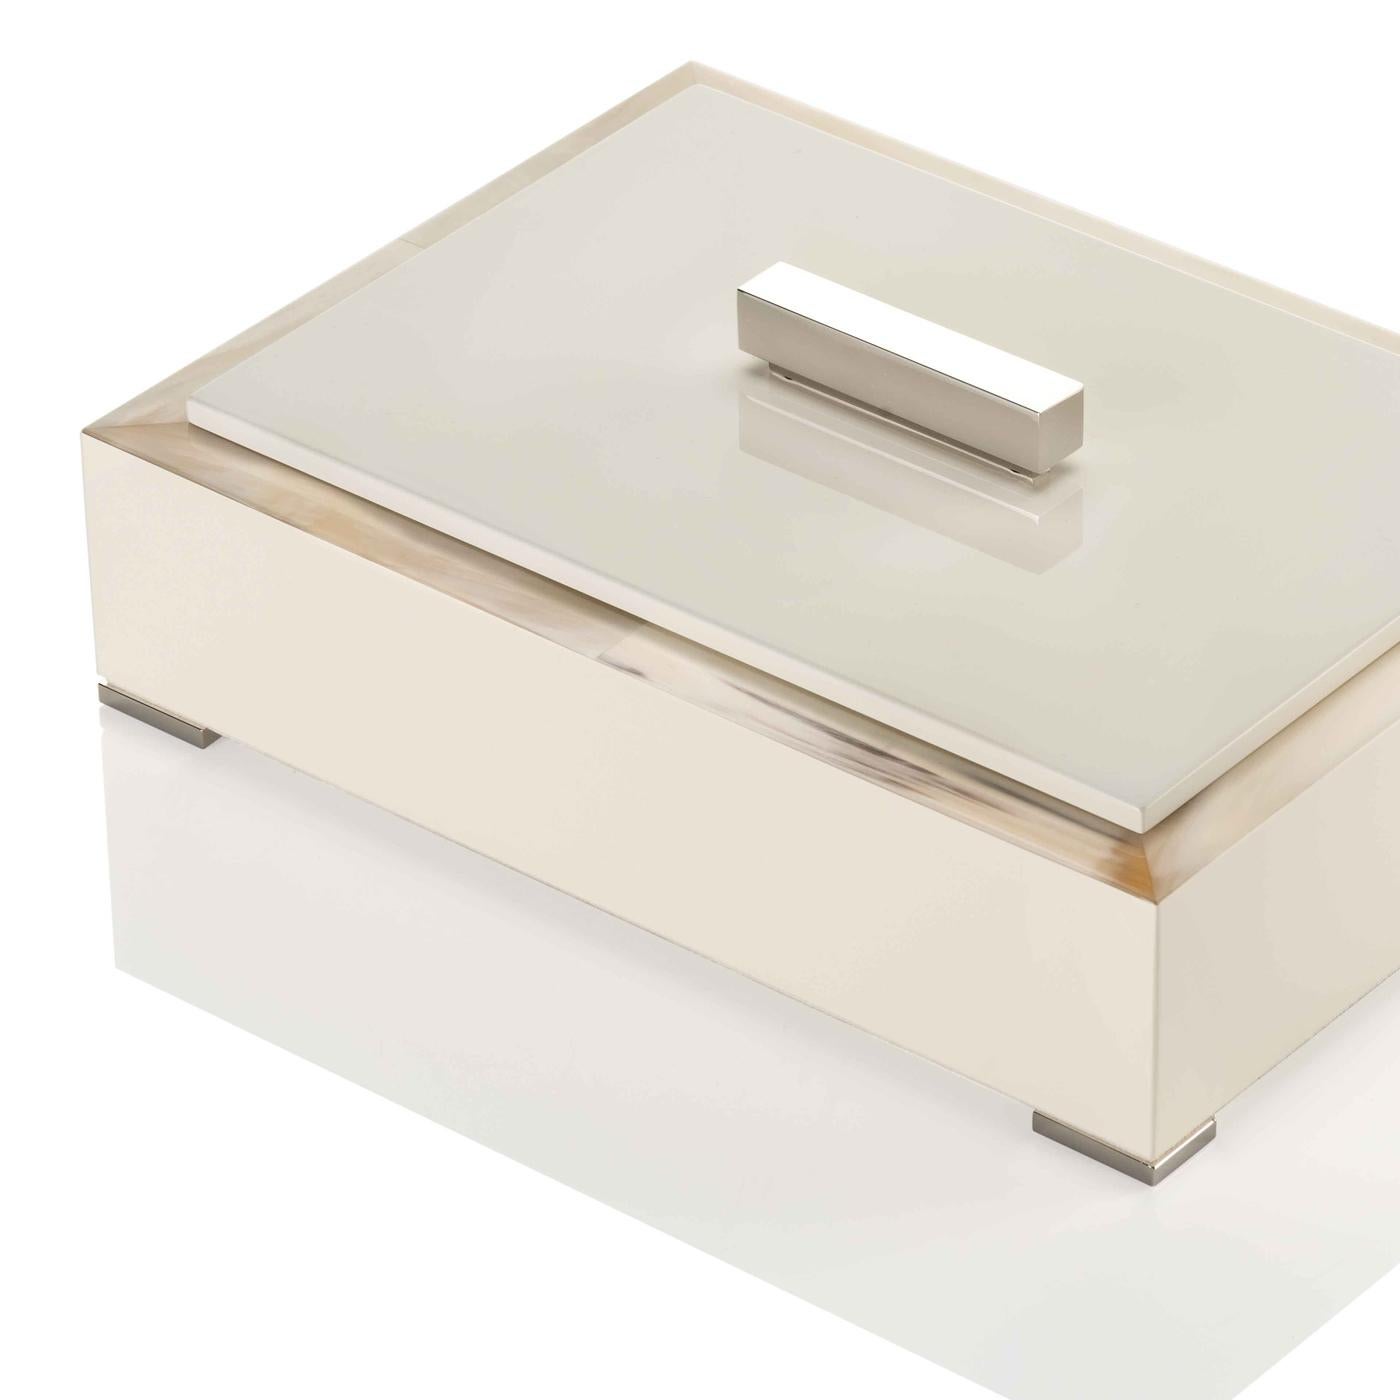 Enriched by a prized interior in ivory Tosca leather, this rectangular storage box crafted of exquisite Horn and wood showcases a structure in delicate ivory with a lacquered, glossy finish in the same hue. Four supporting feet in chromed brass